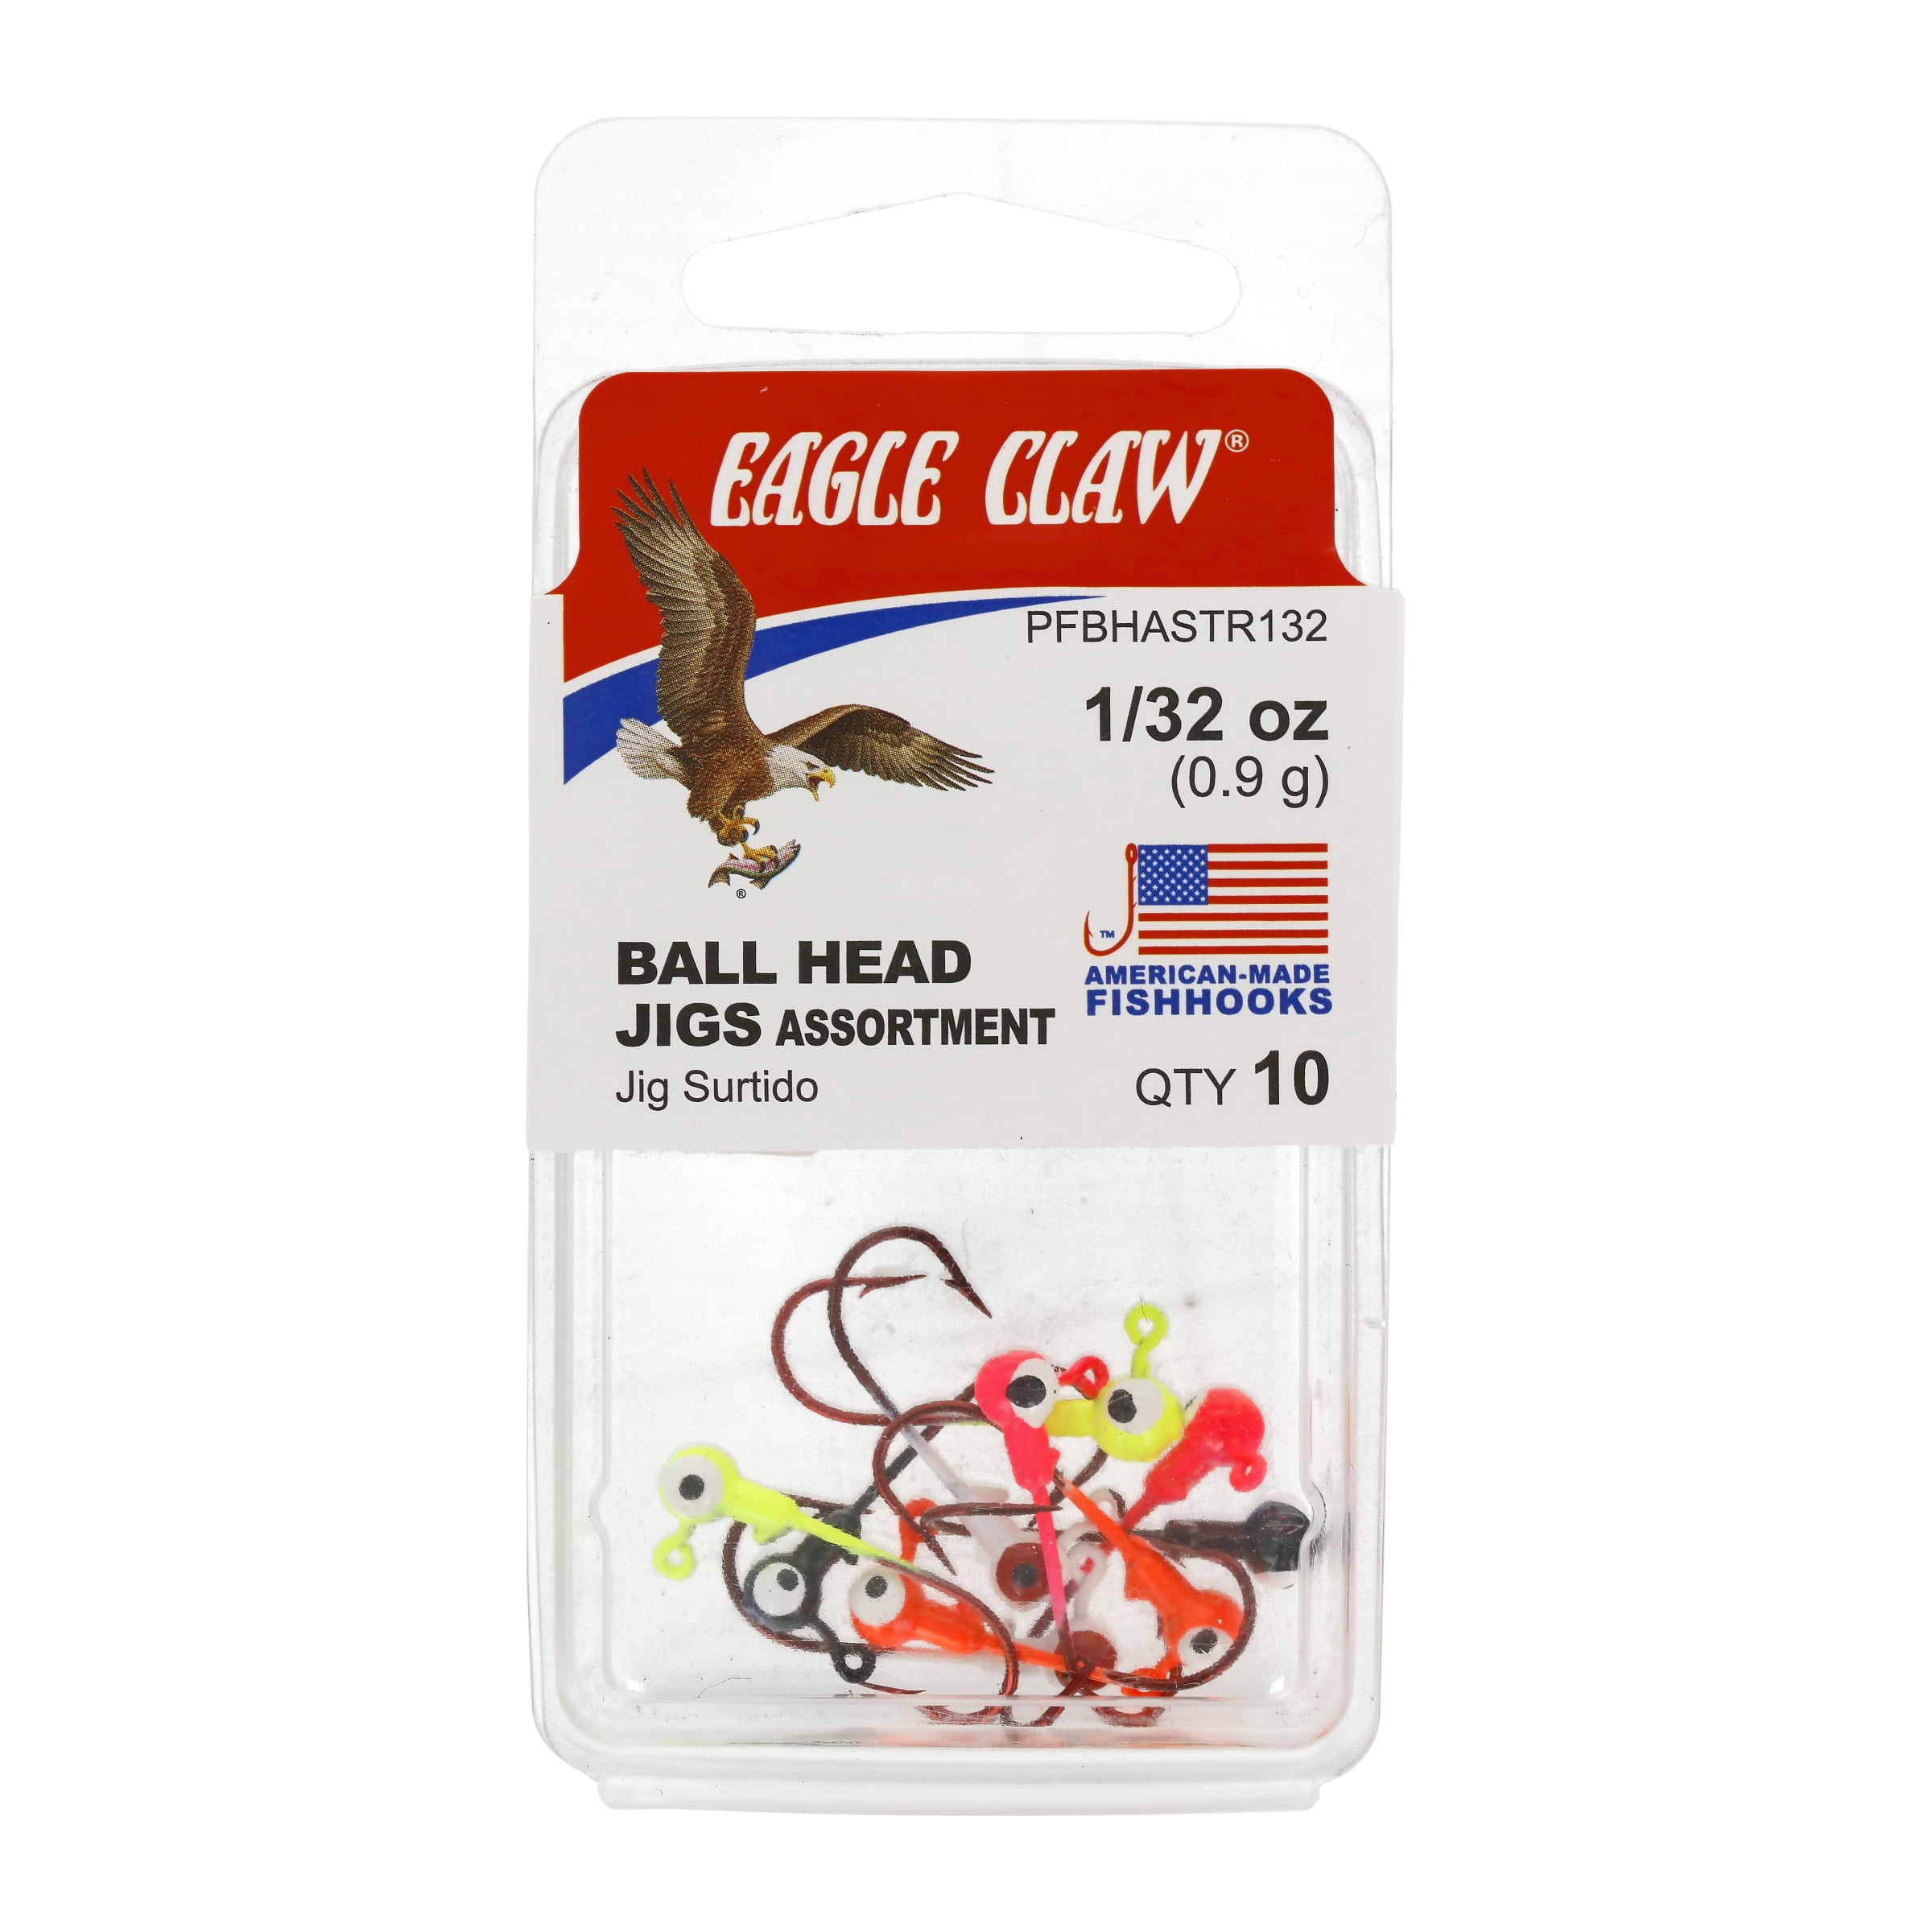 Eagle Claw 1/32 Ounce Unpainted Ball Head Jigs Assortment with Red Hook - 10 ct